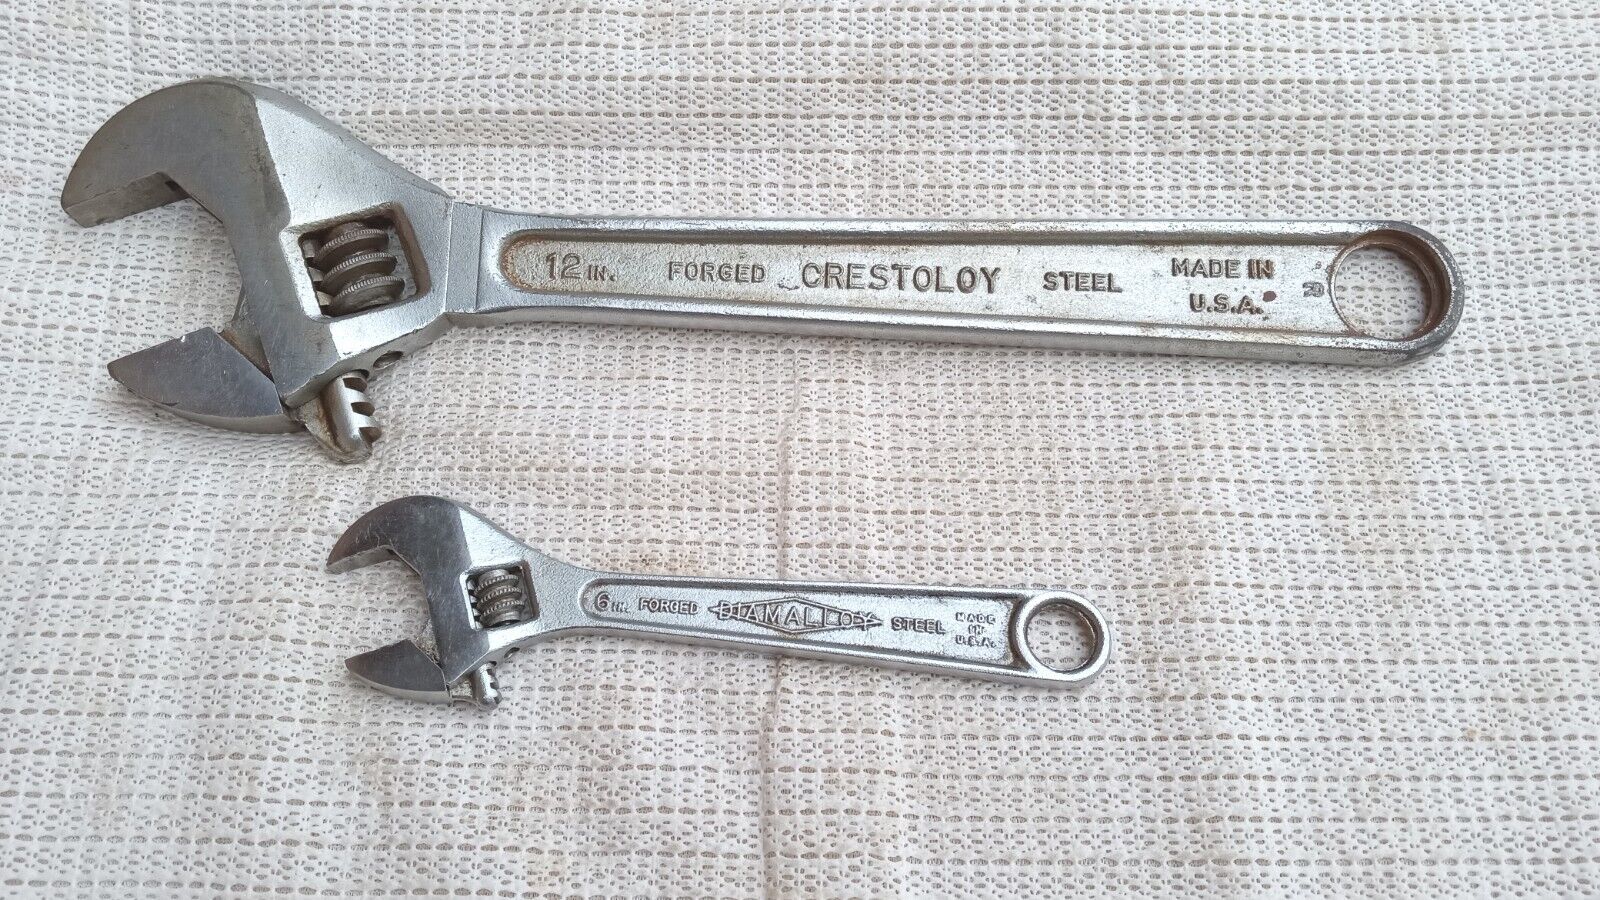 Lot of  2 Vintage Wrenches - USA.  12 Inch Crescent & 6 Diamond.One Day Auction 